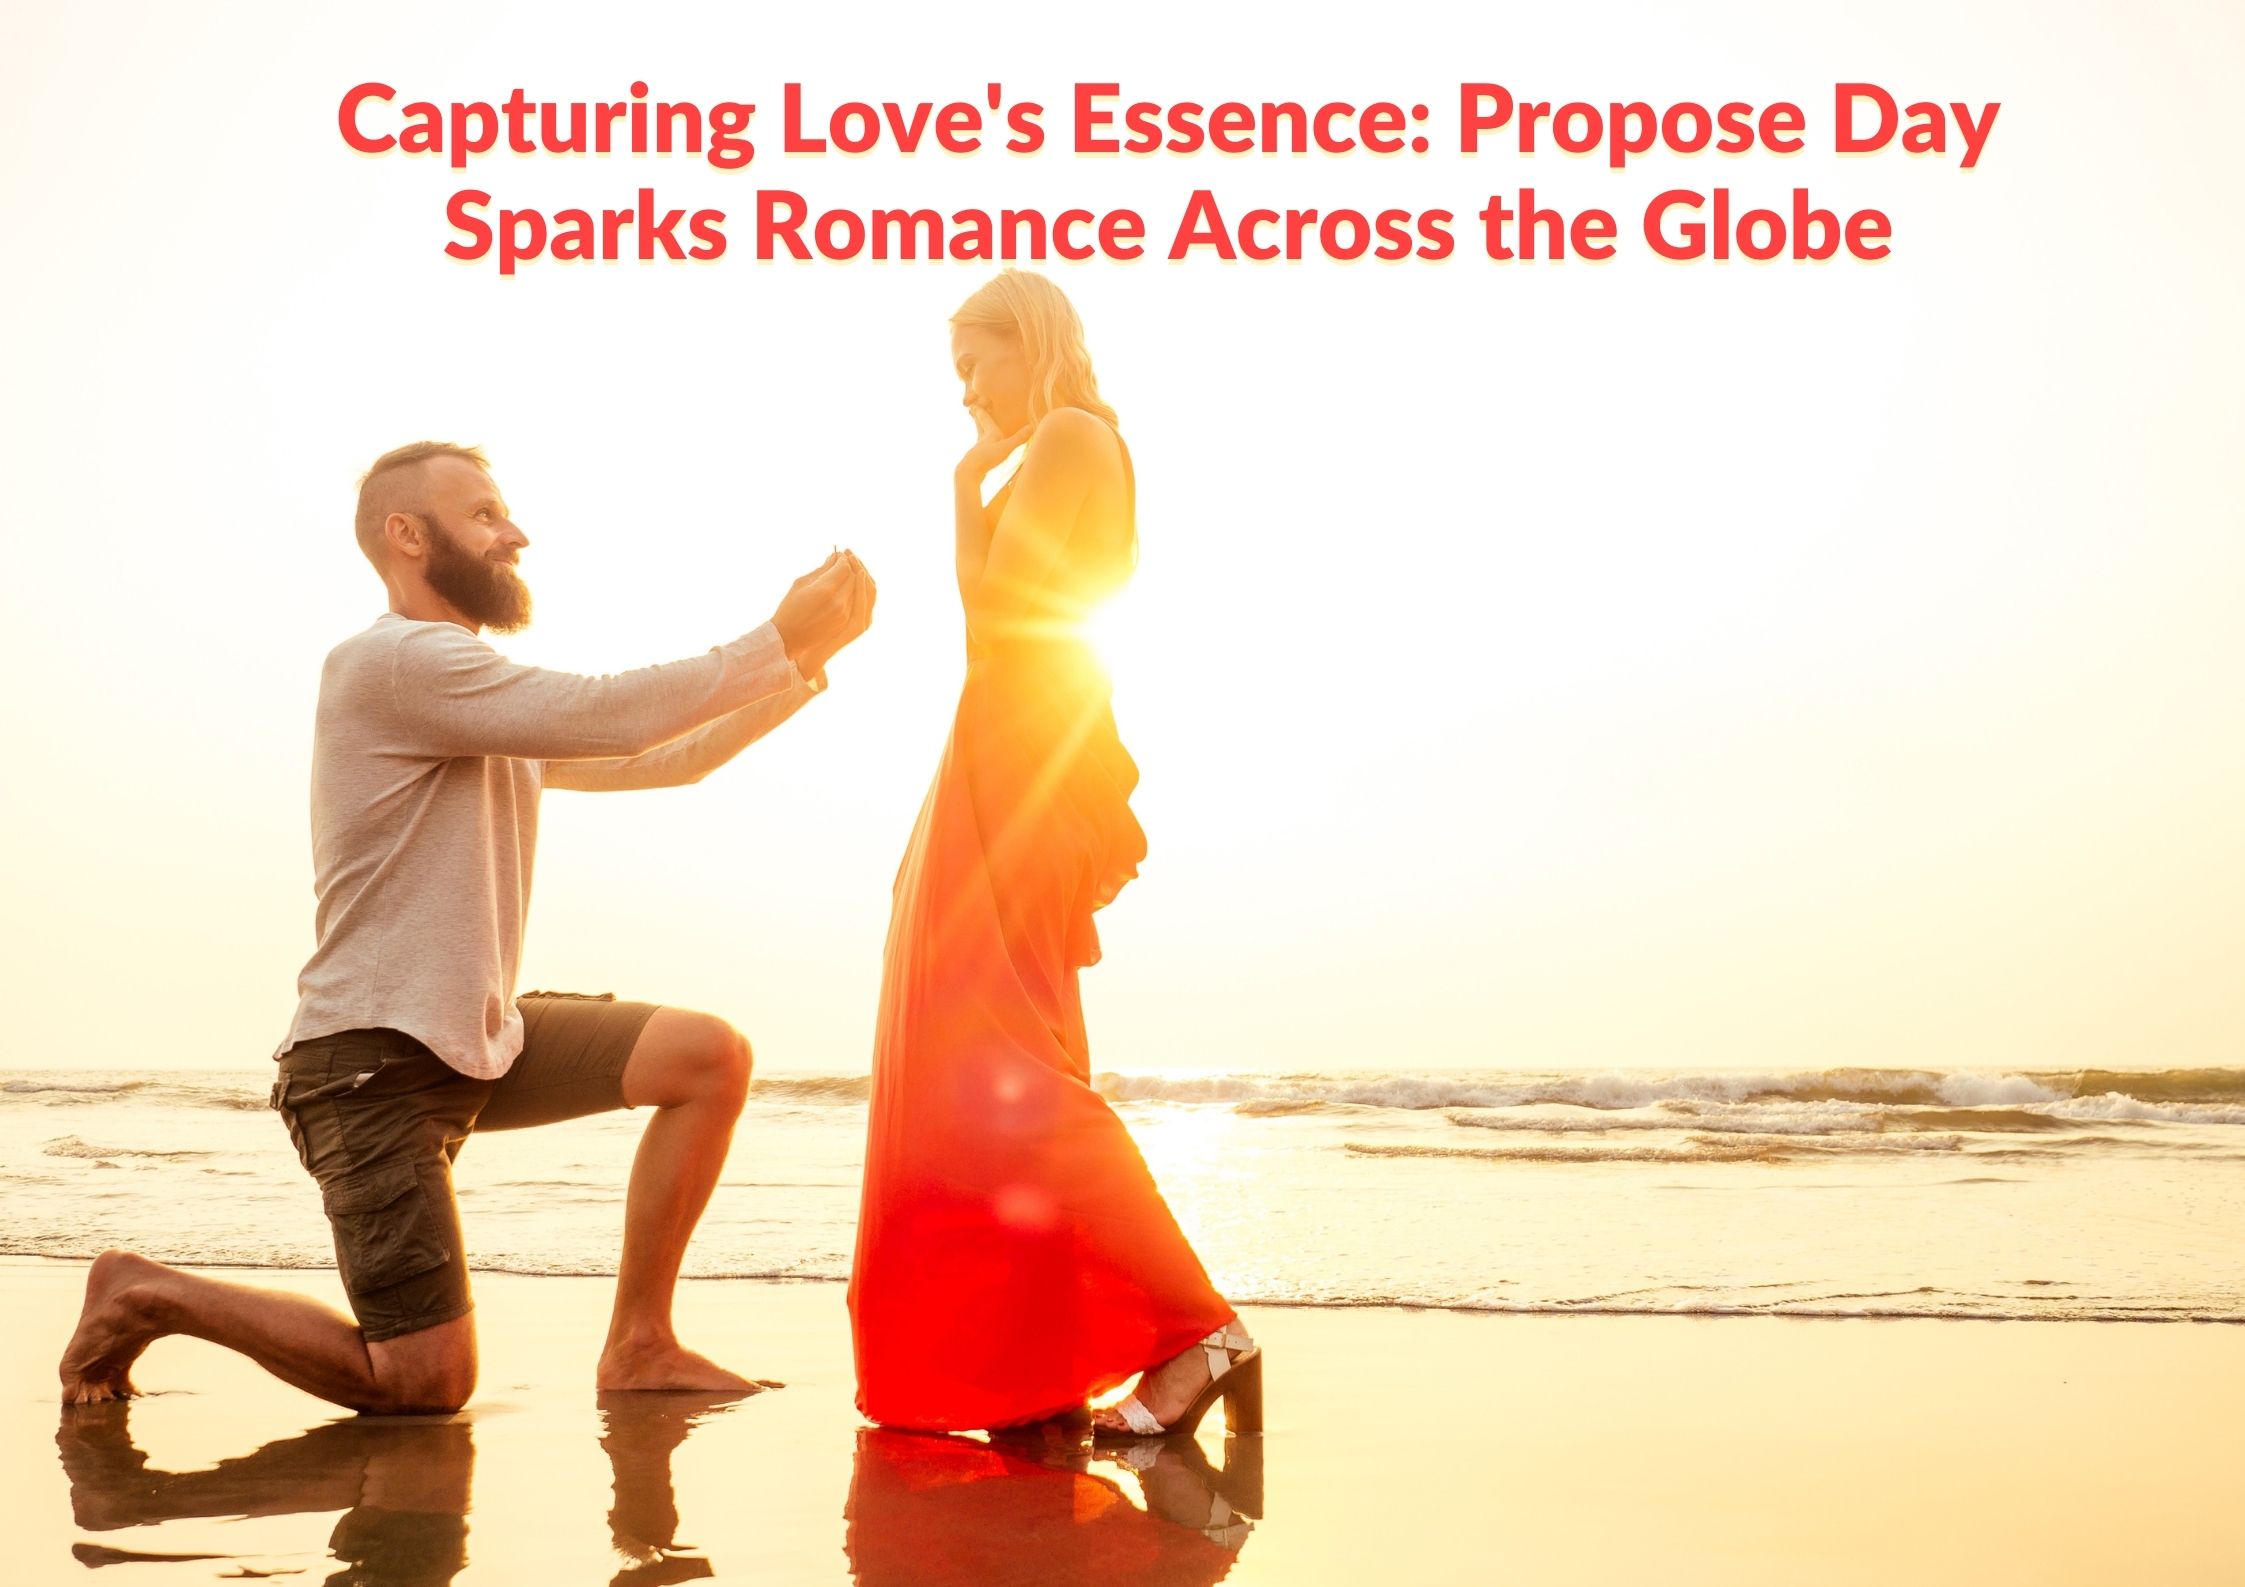 Capturing Love's Essence: Propose Day Sparks Romance Across the Globe